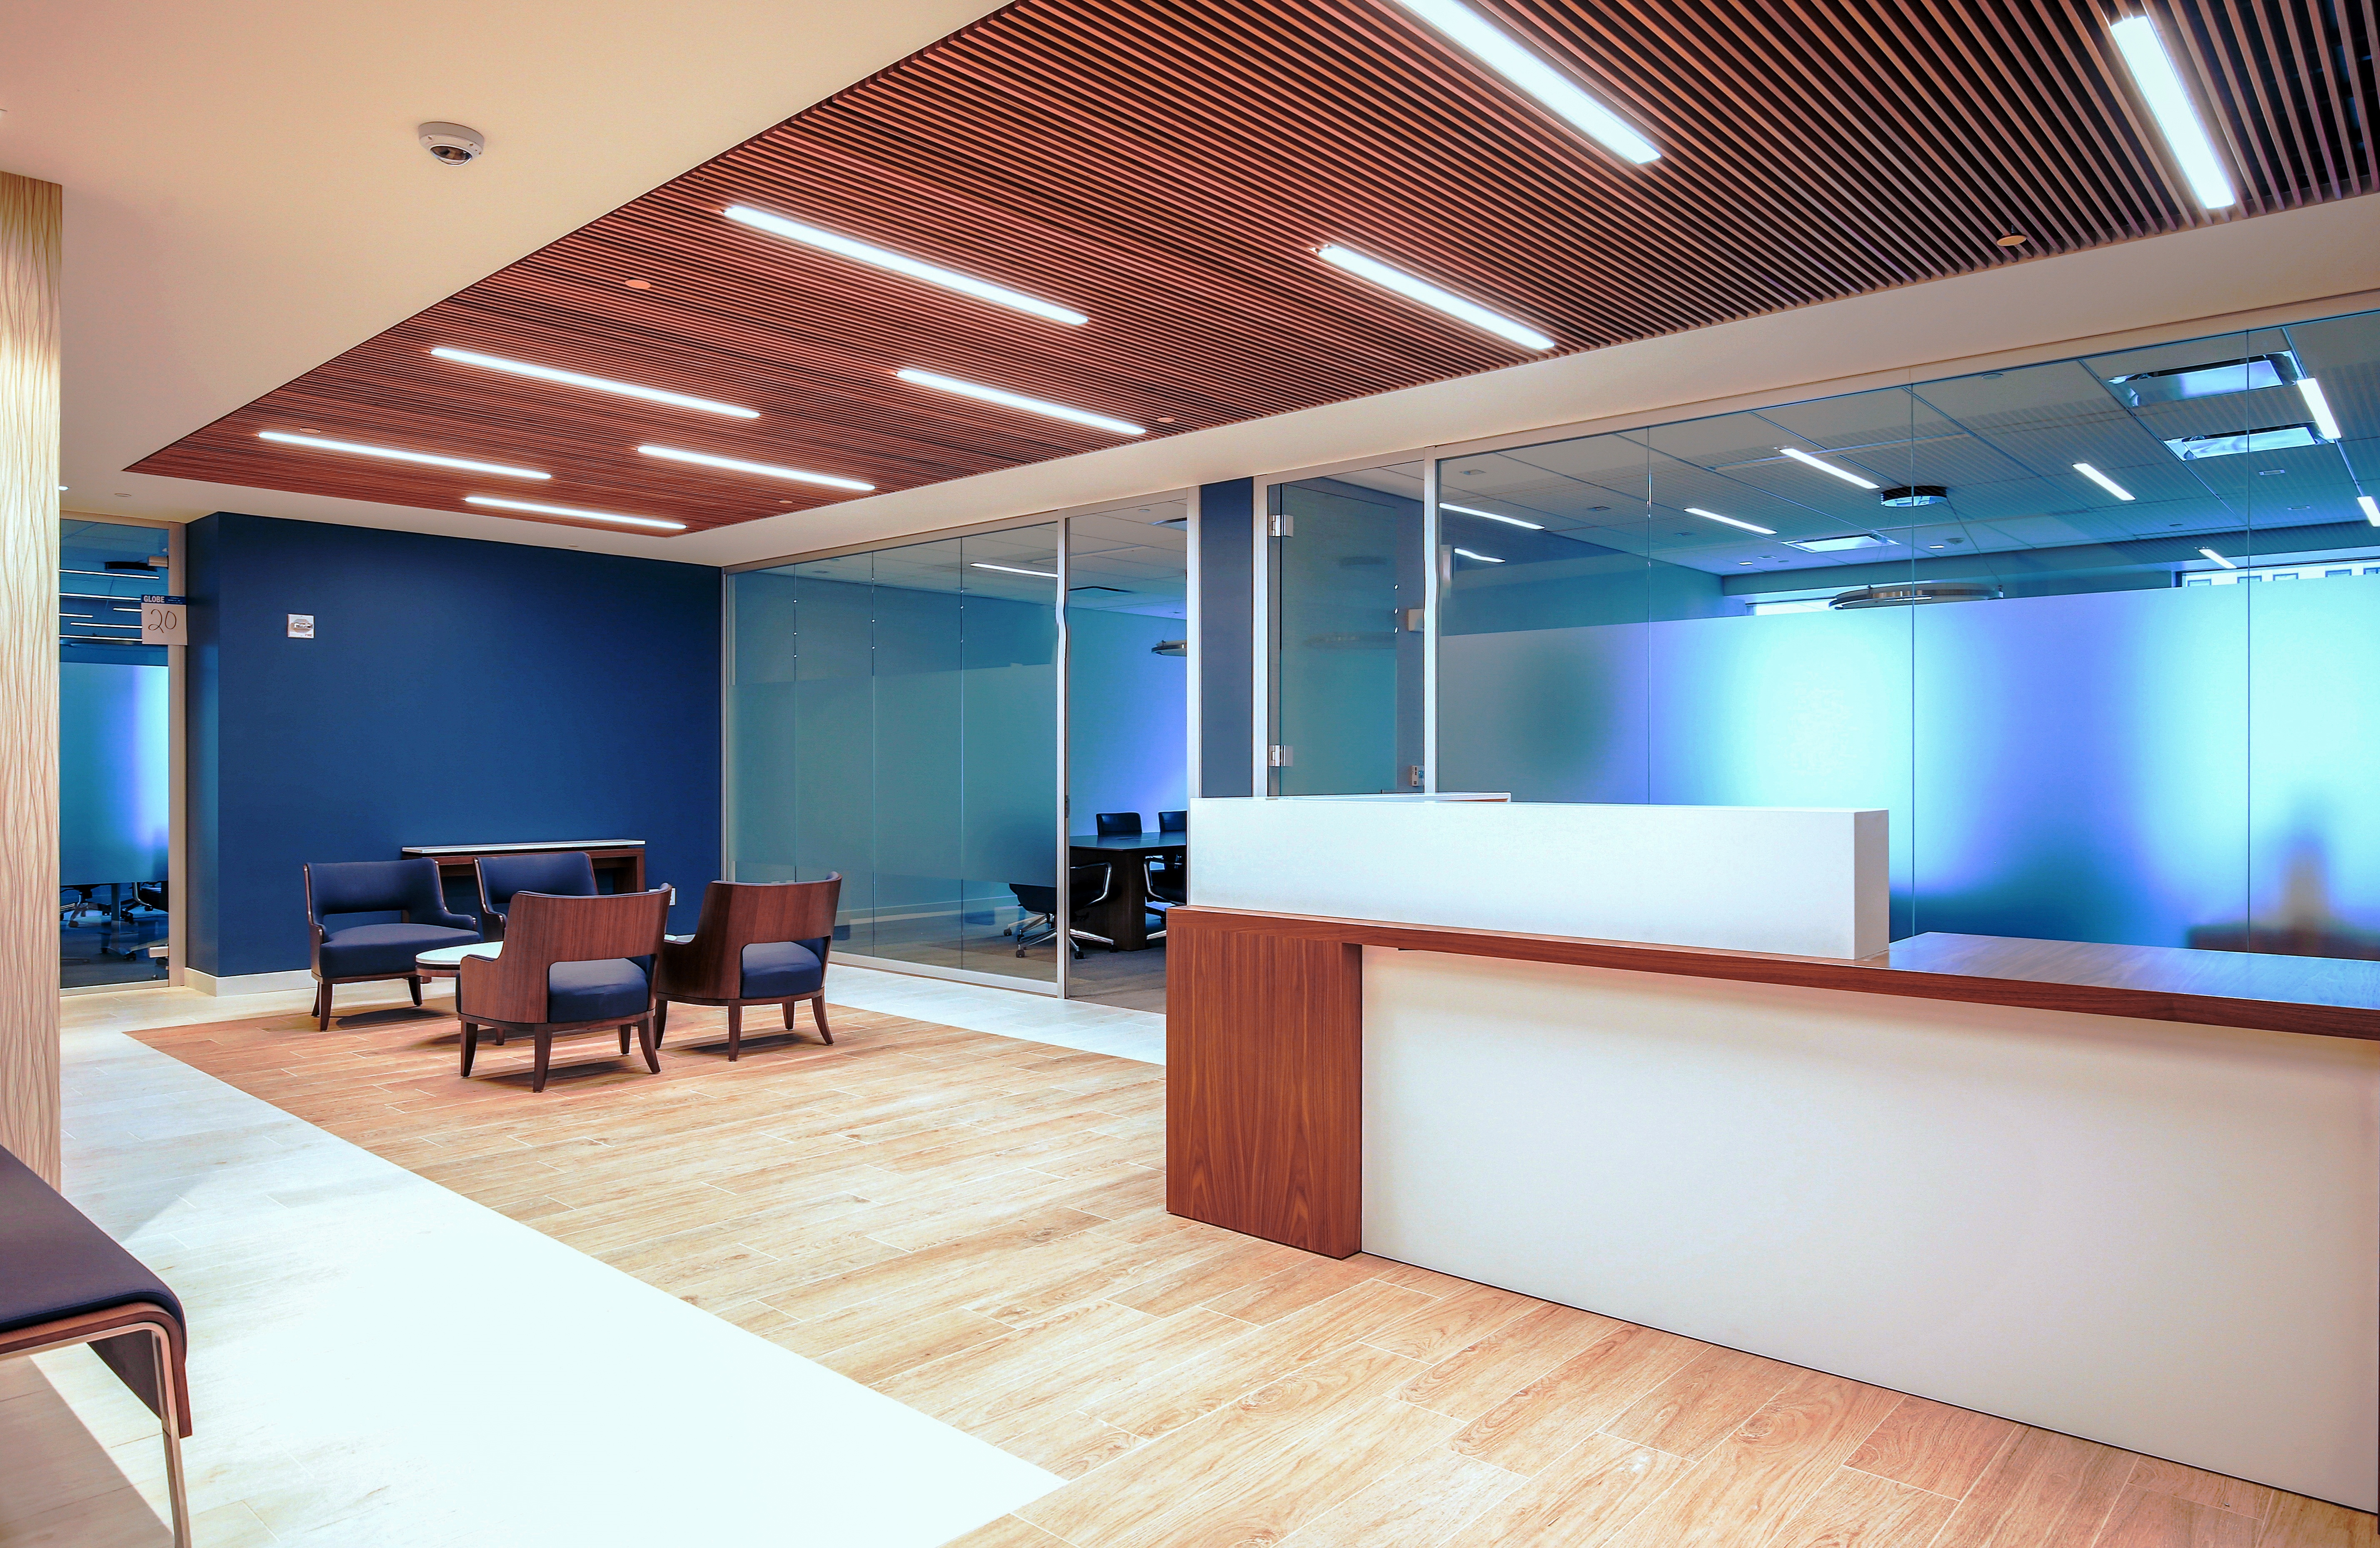 New York Law Firm office reception area with acoustic ceiling panels and frosted glass office walls